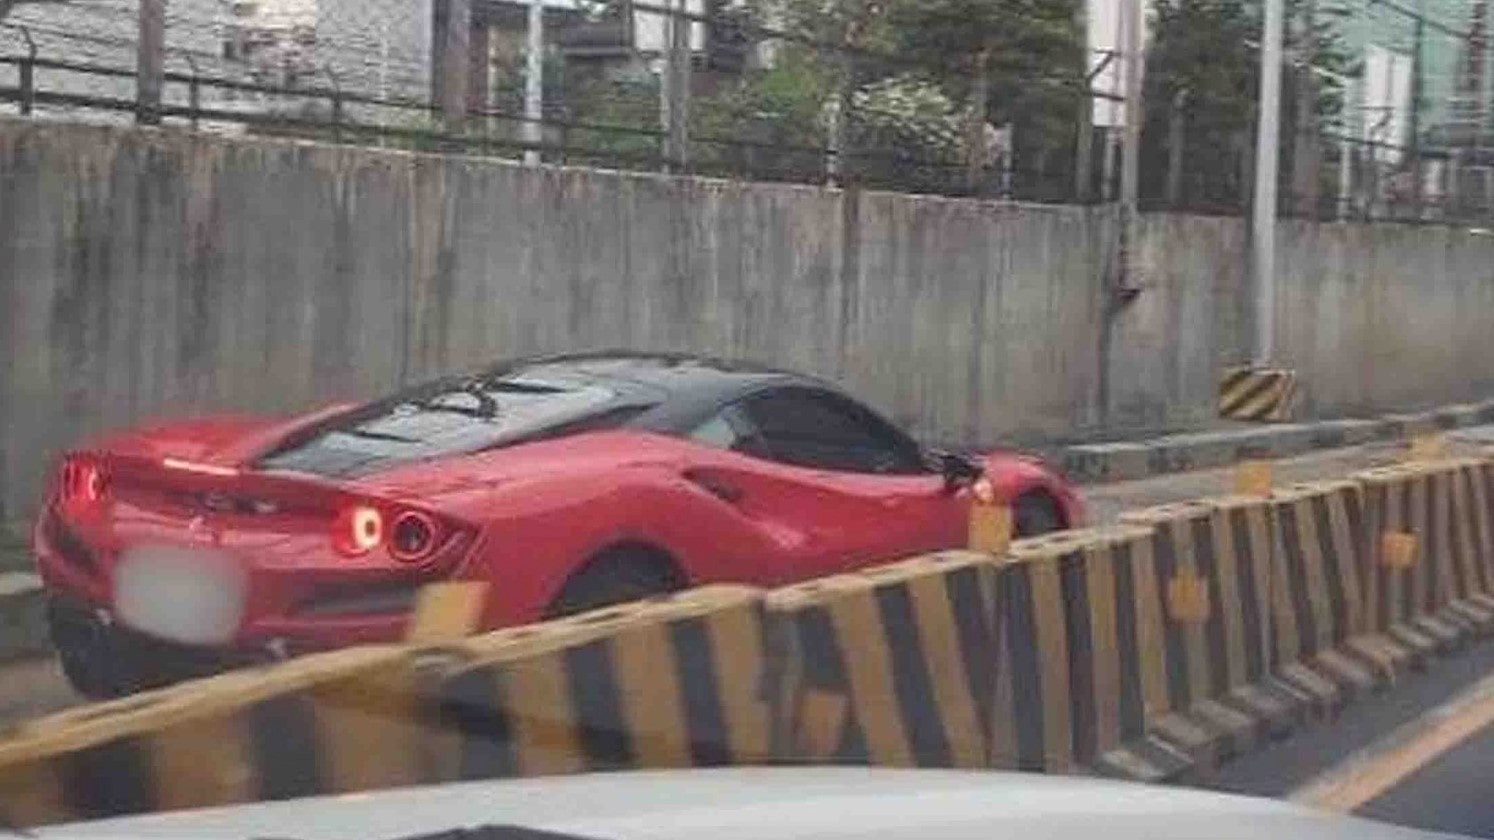 Bus lane ONLY: LTO summons owner of expensive Ferrari F8 Tributo driven illegally along EDSA bus lane